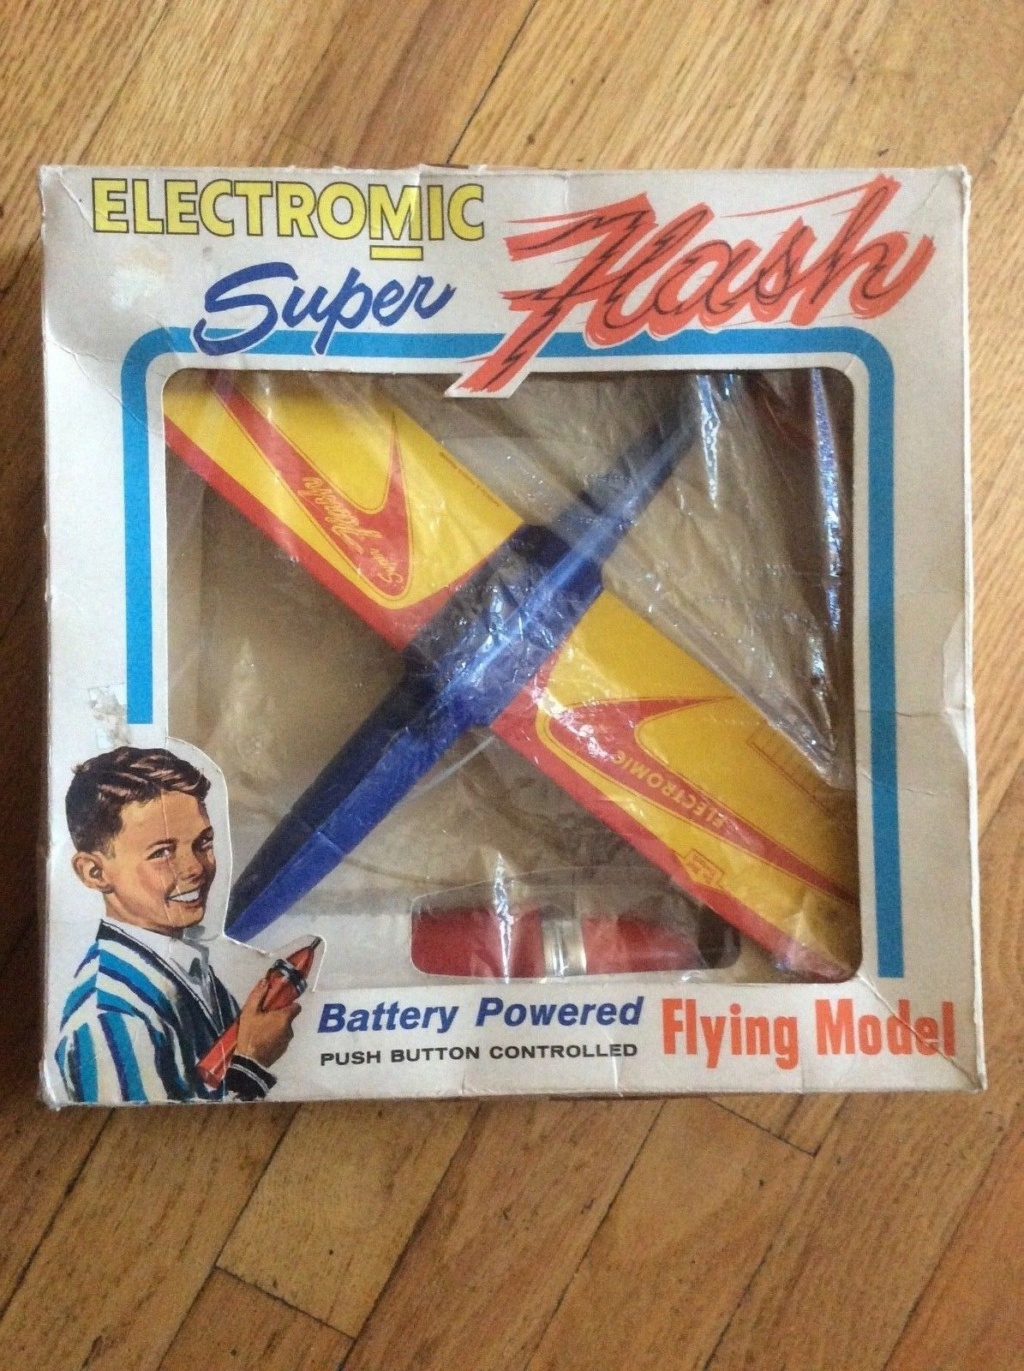 My first "control Line" model airplane was a Stanzel "Electromic Flash". 5_75